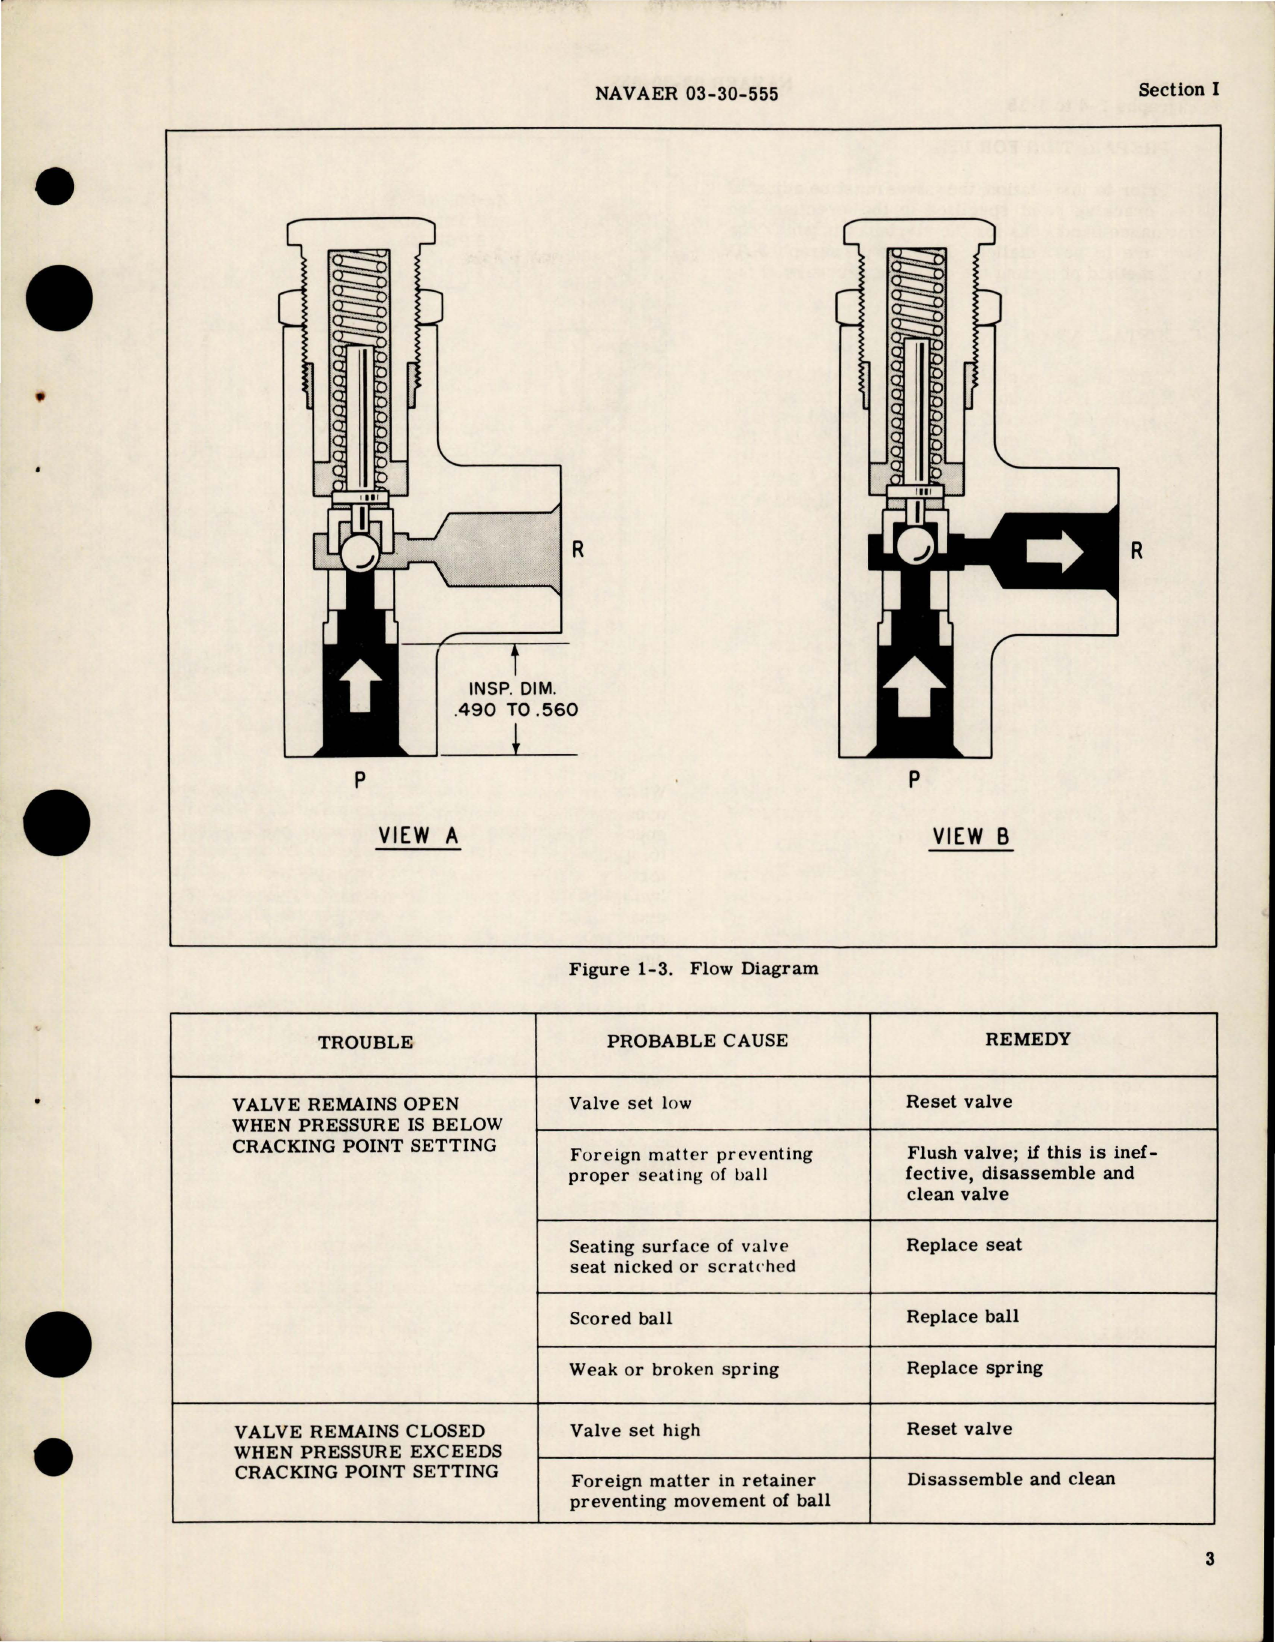 Sample page 5 from AirCorps Library document: Operation, Service and Overhaul Instructions w Parts Catalog for Thermal Relief Valves